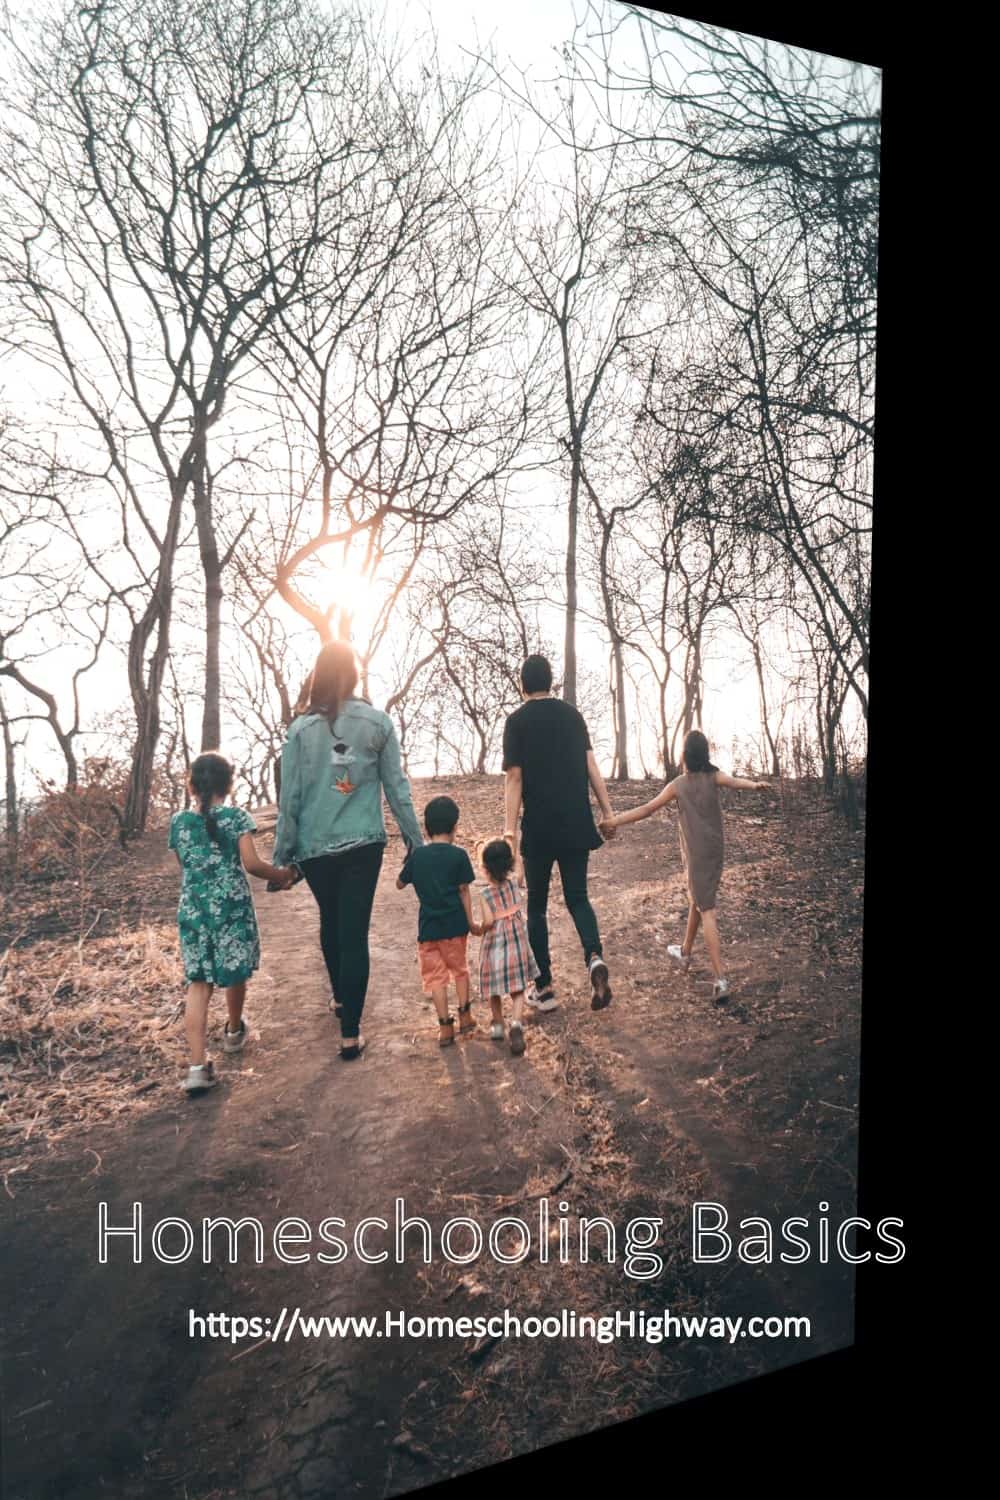 A family is walking in the woods. Homeschooling Basics by Homeschooling Highway